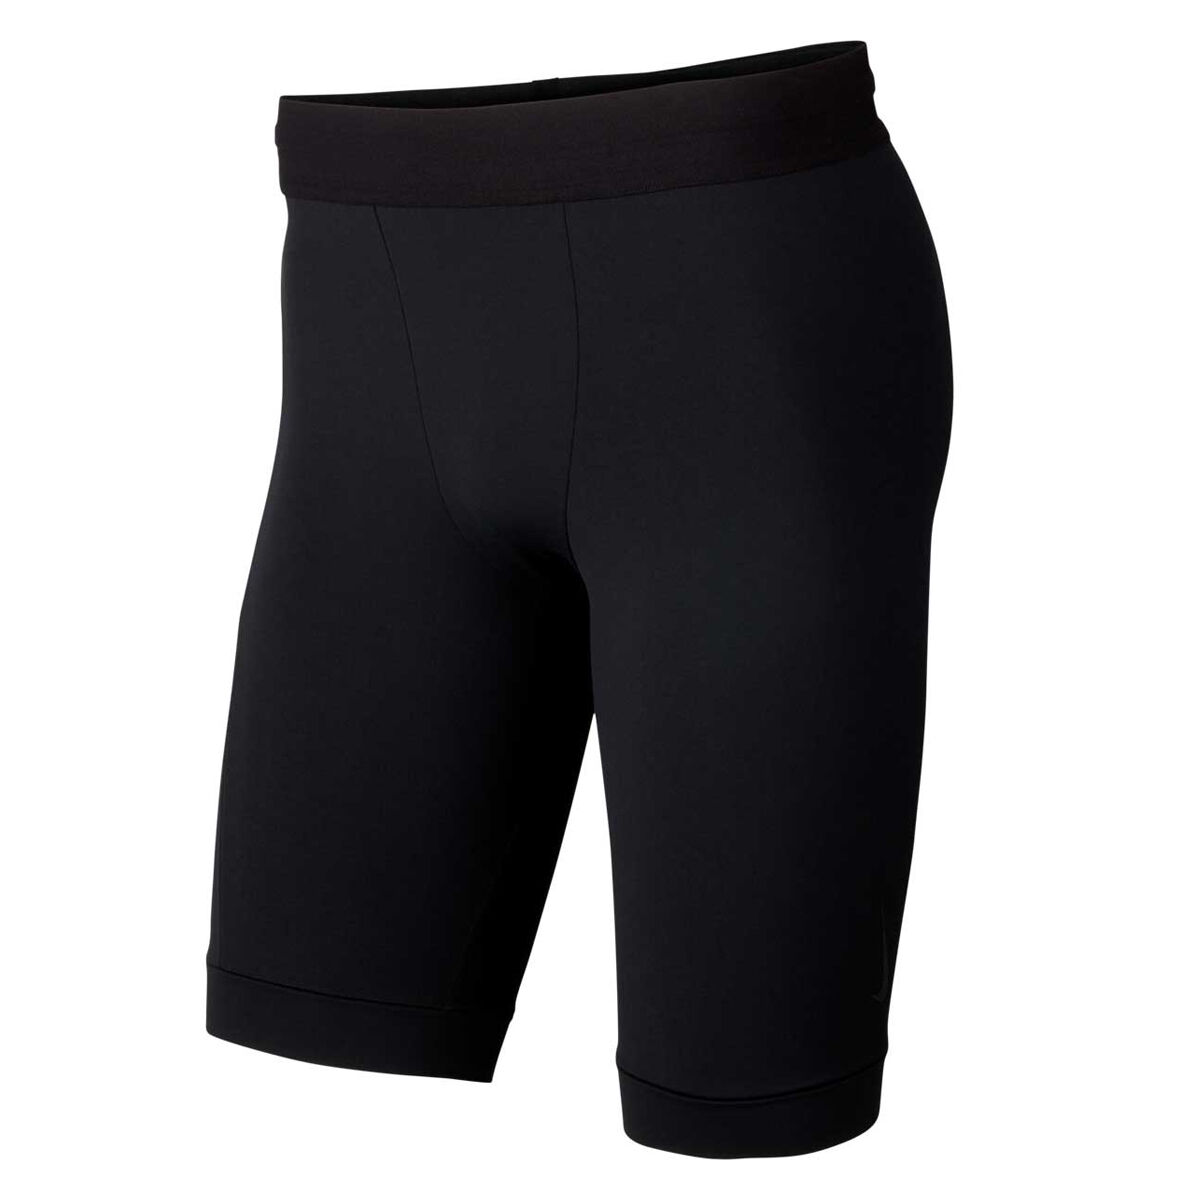 mens nike shorts with spandex built in